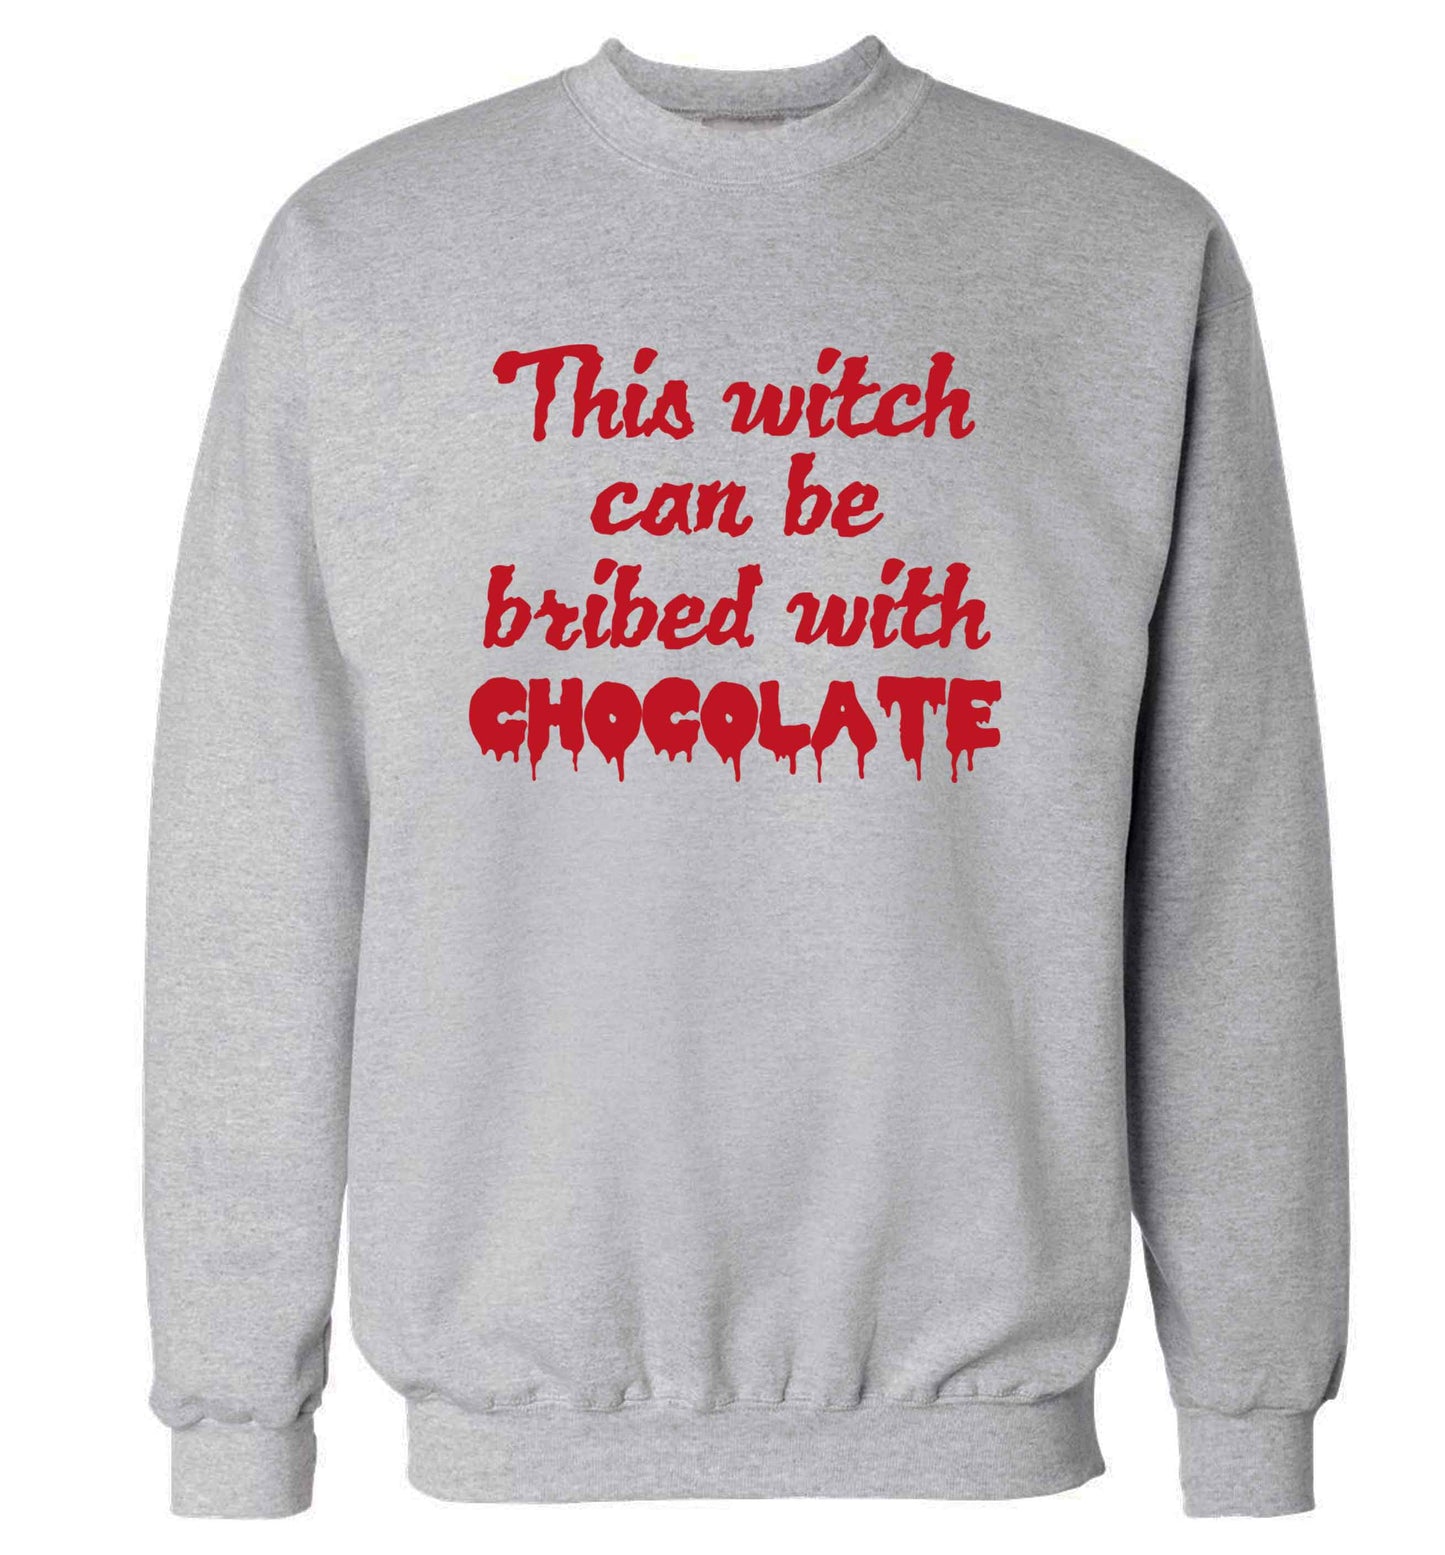 This witch can be bribed with chocolate adult's unisex grey sweater 2XL